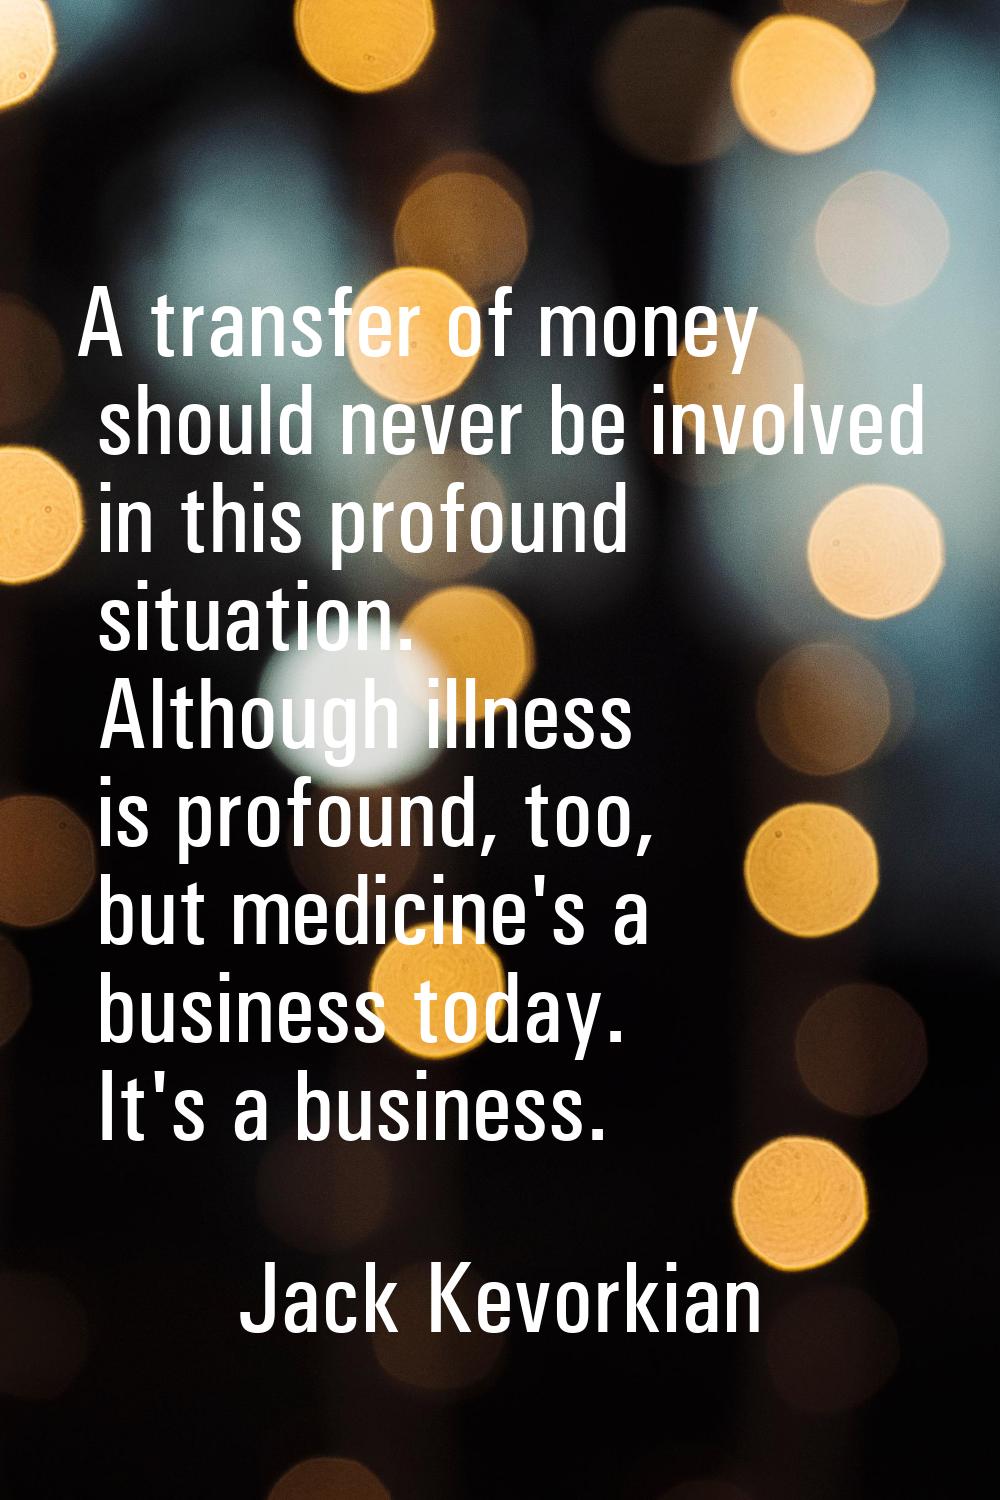 A transfer of money should never be involved in this profound situation. Although illness is profou